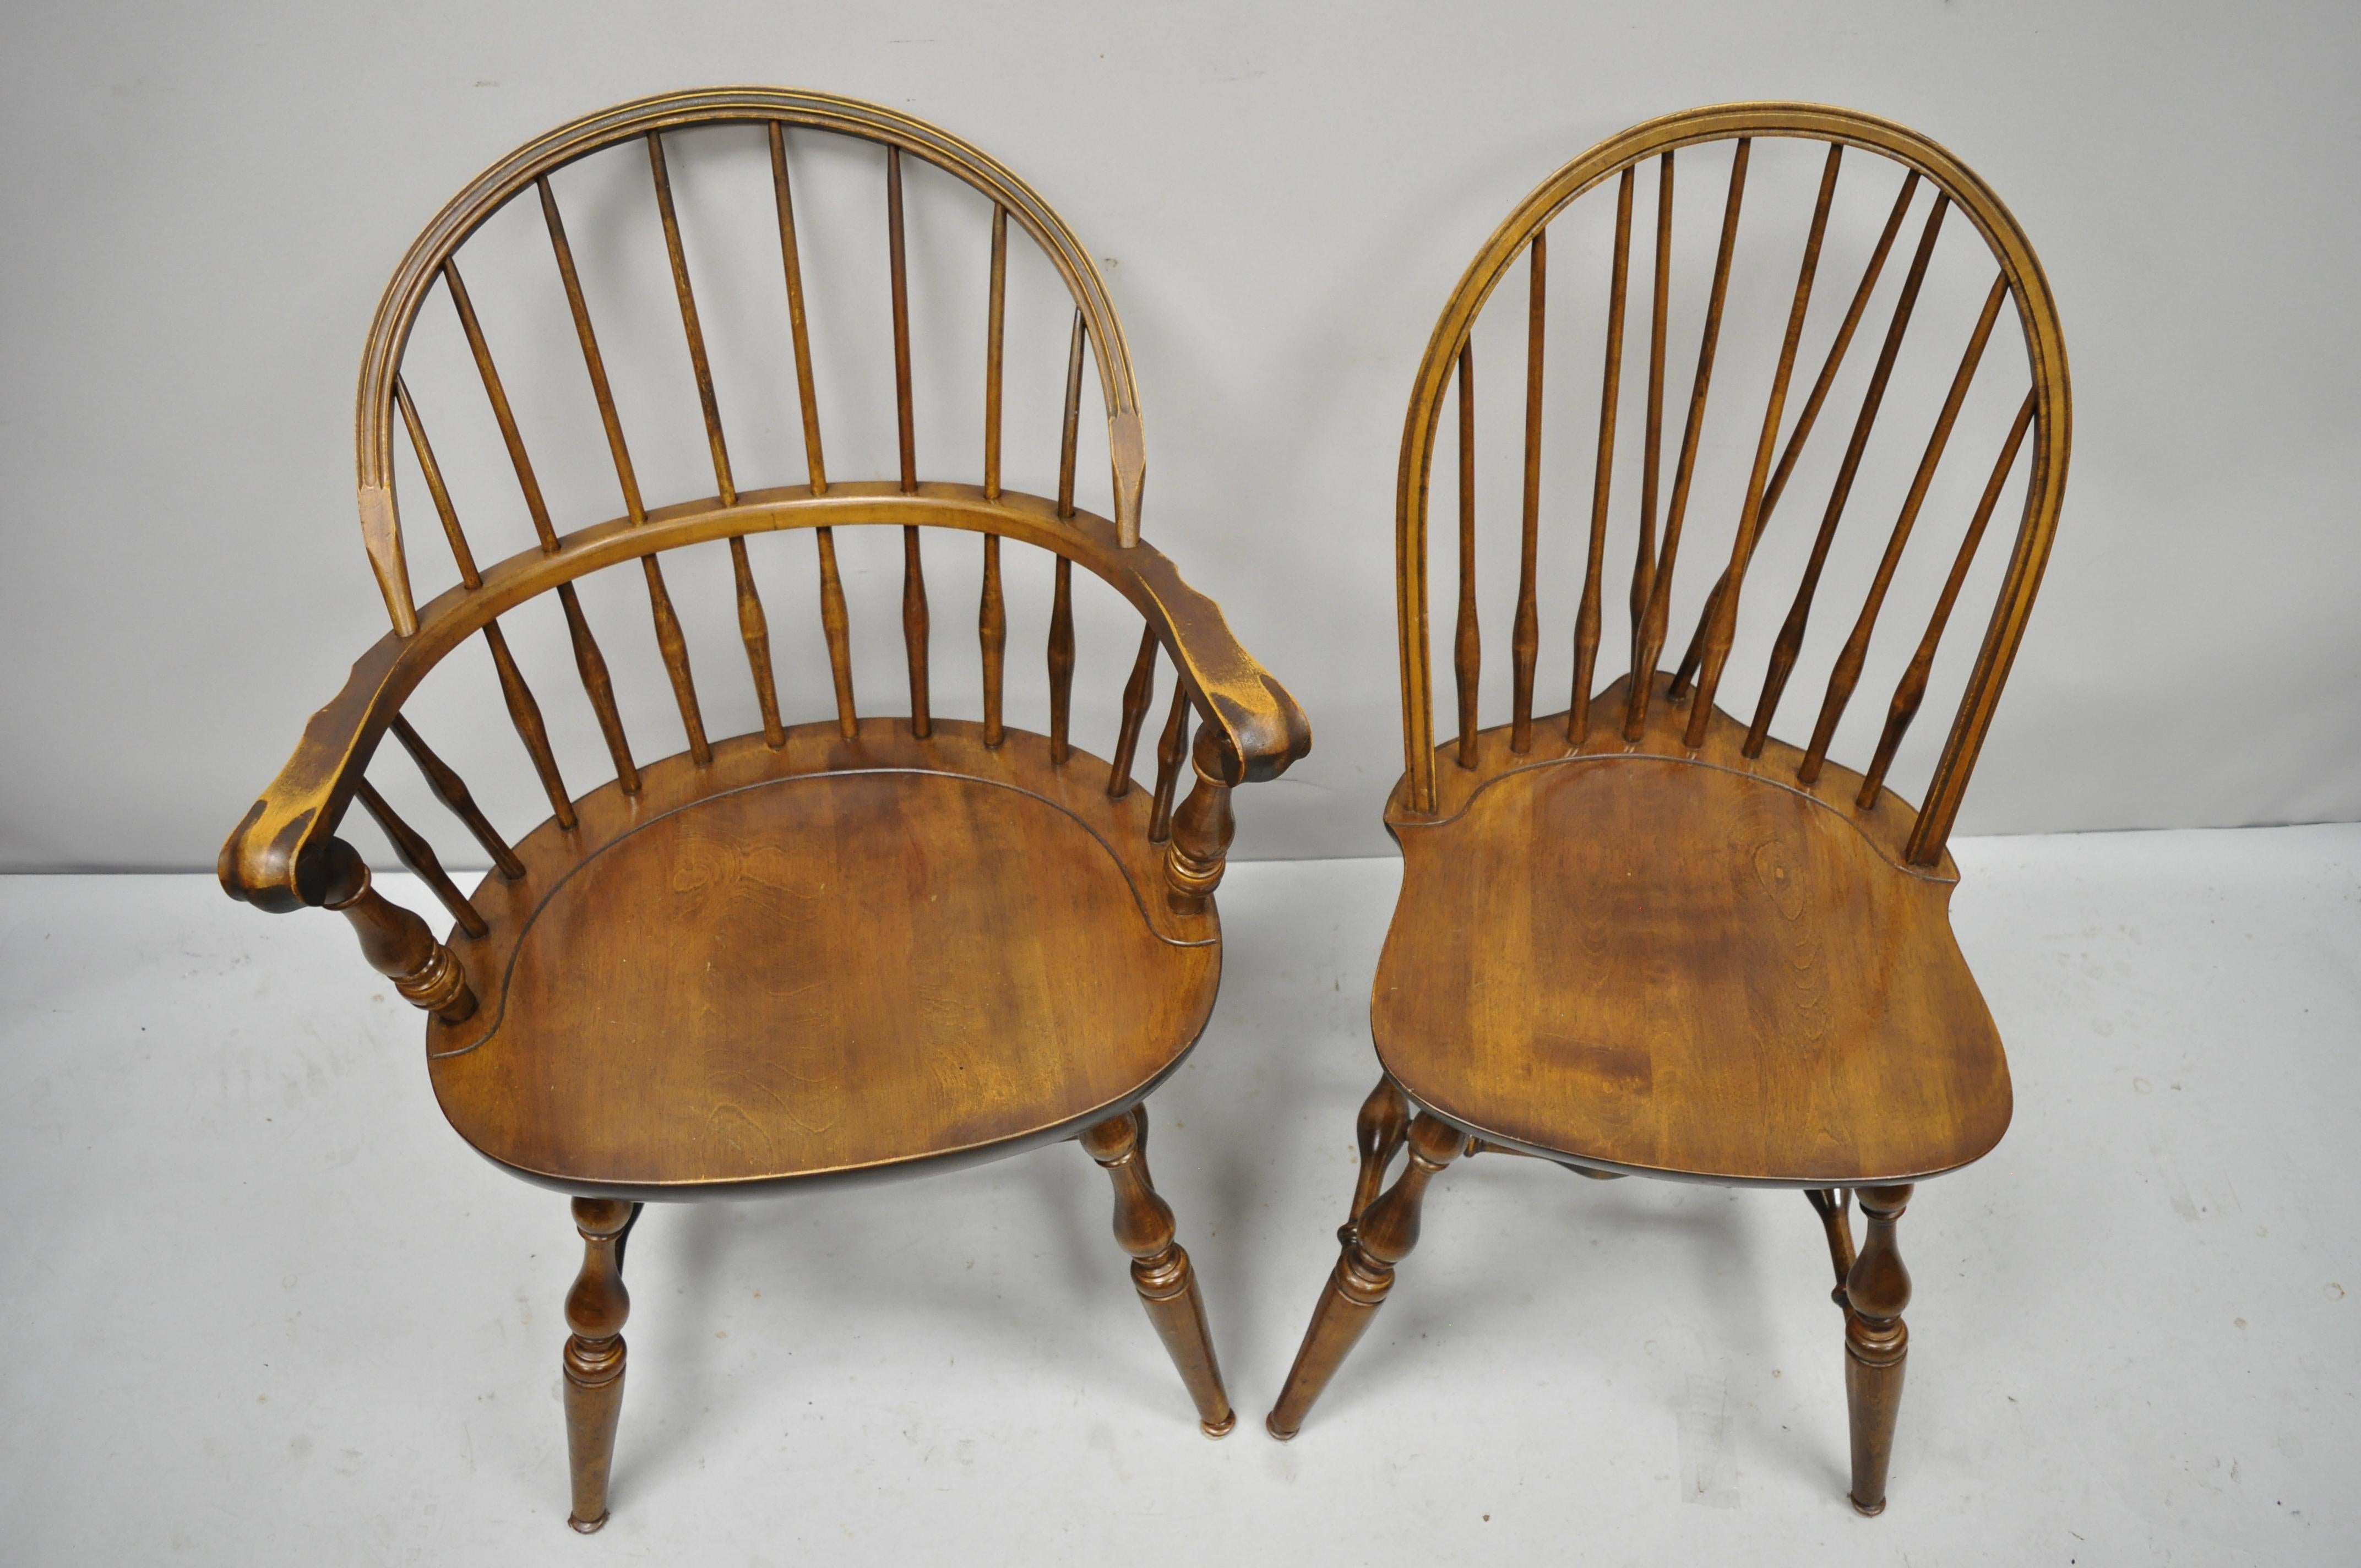 nichols and stone chair value